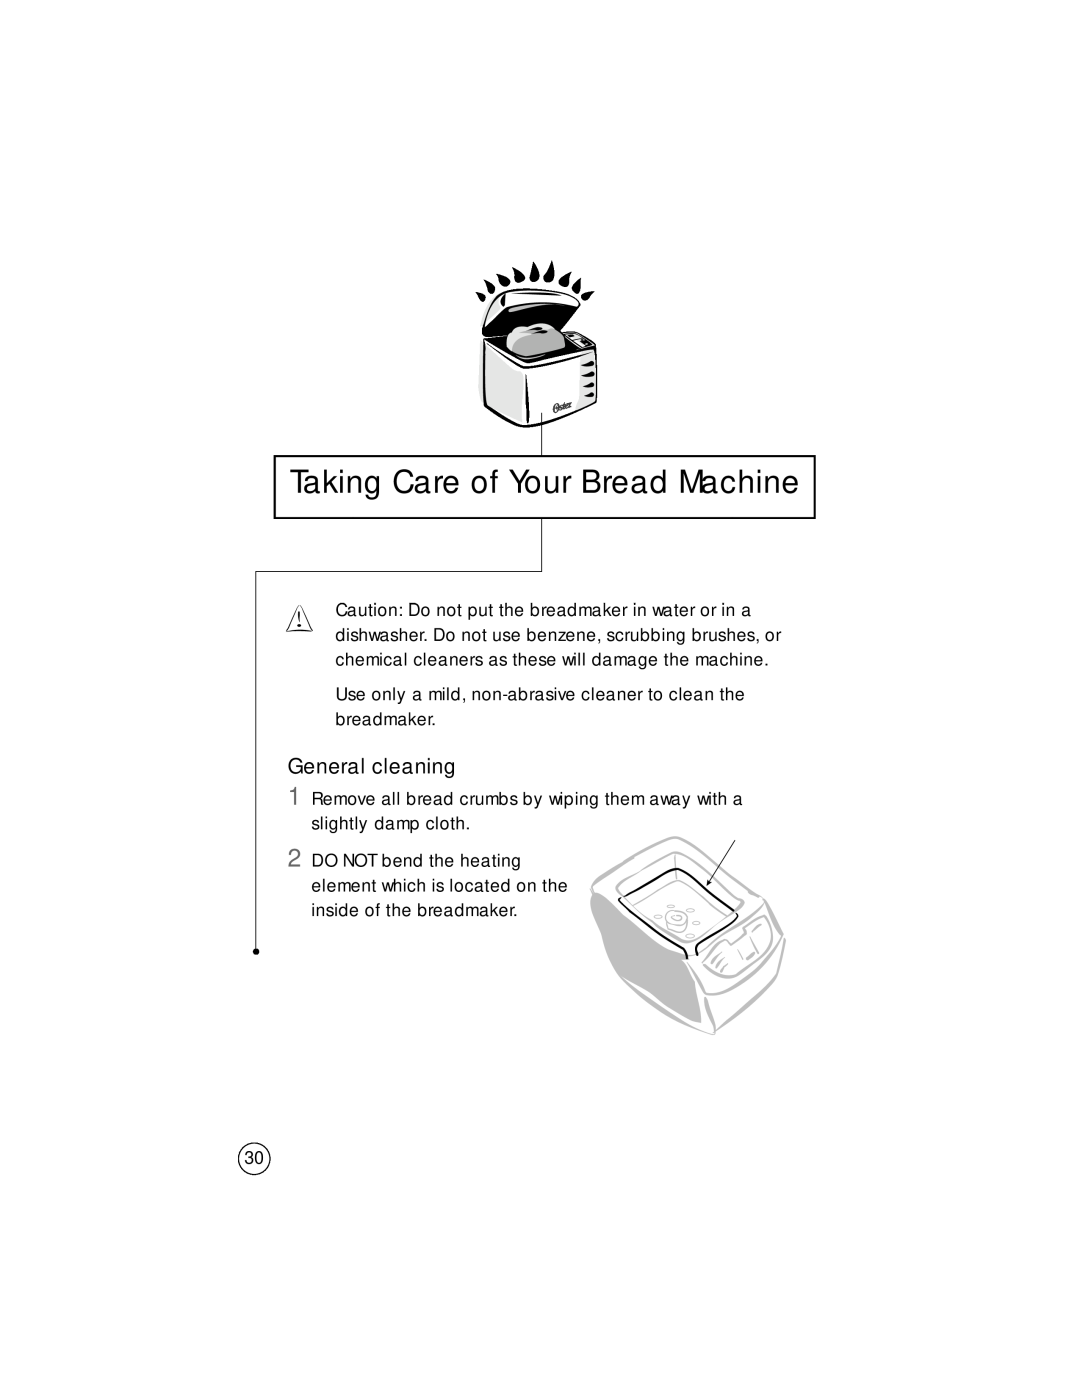 Sunbeam 5834, 102817 user manual Taking Care of Your Bread Machine, General cleaning 